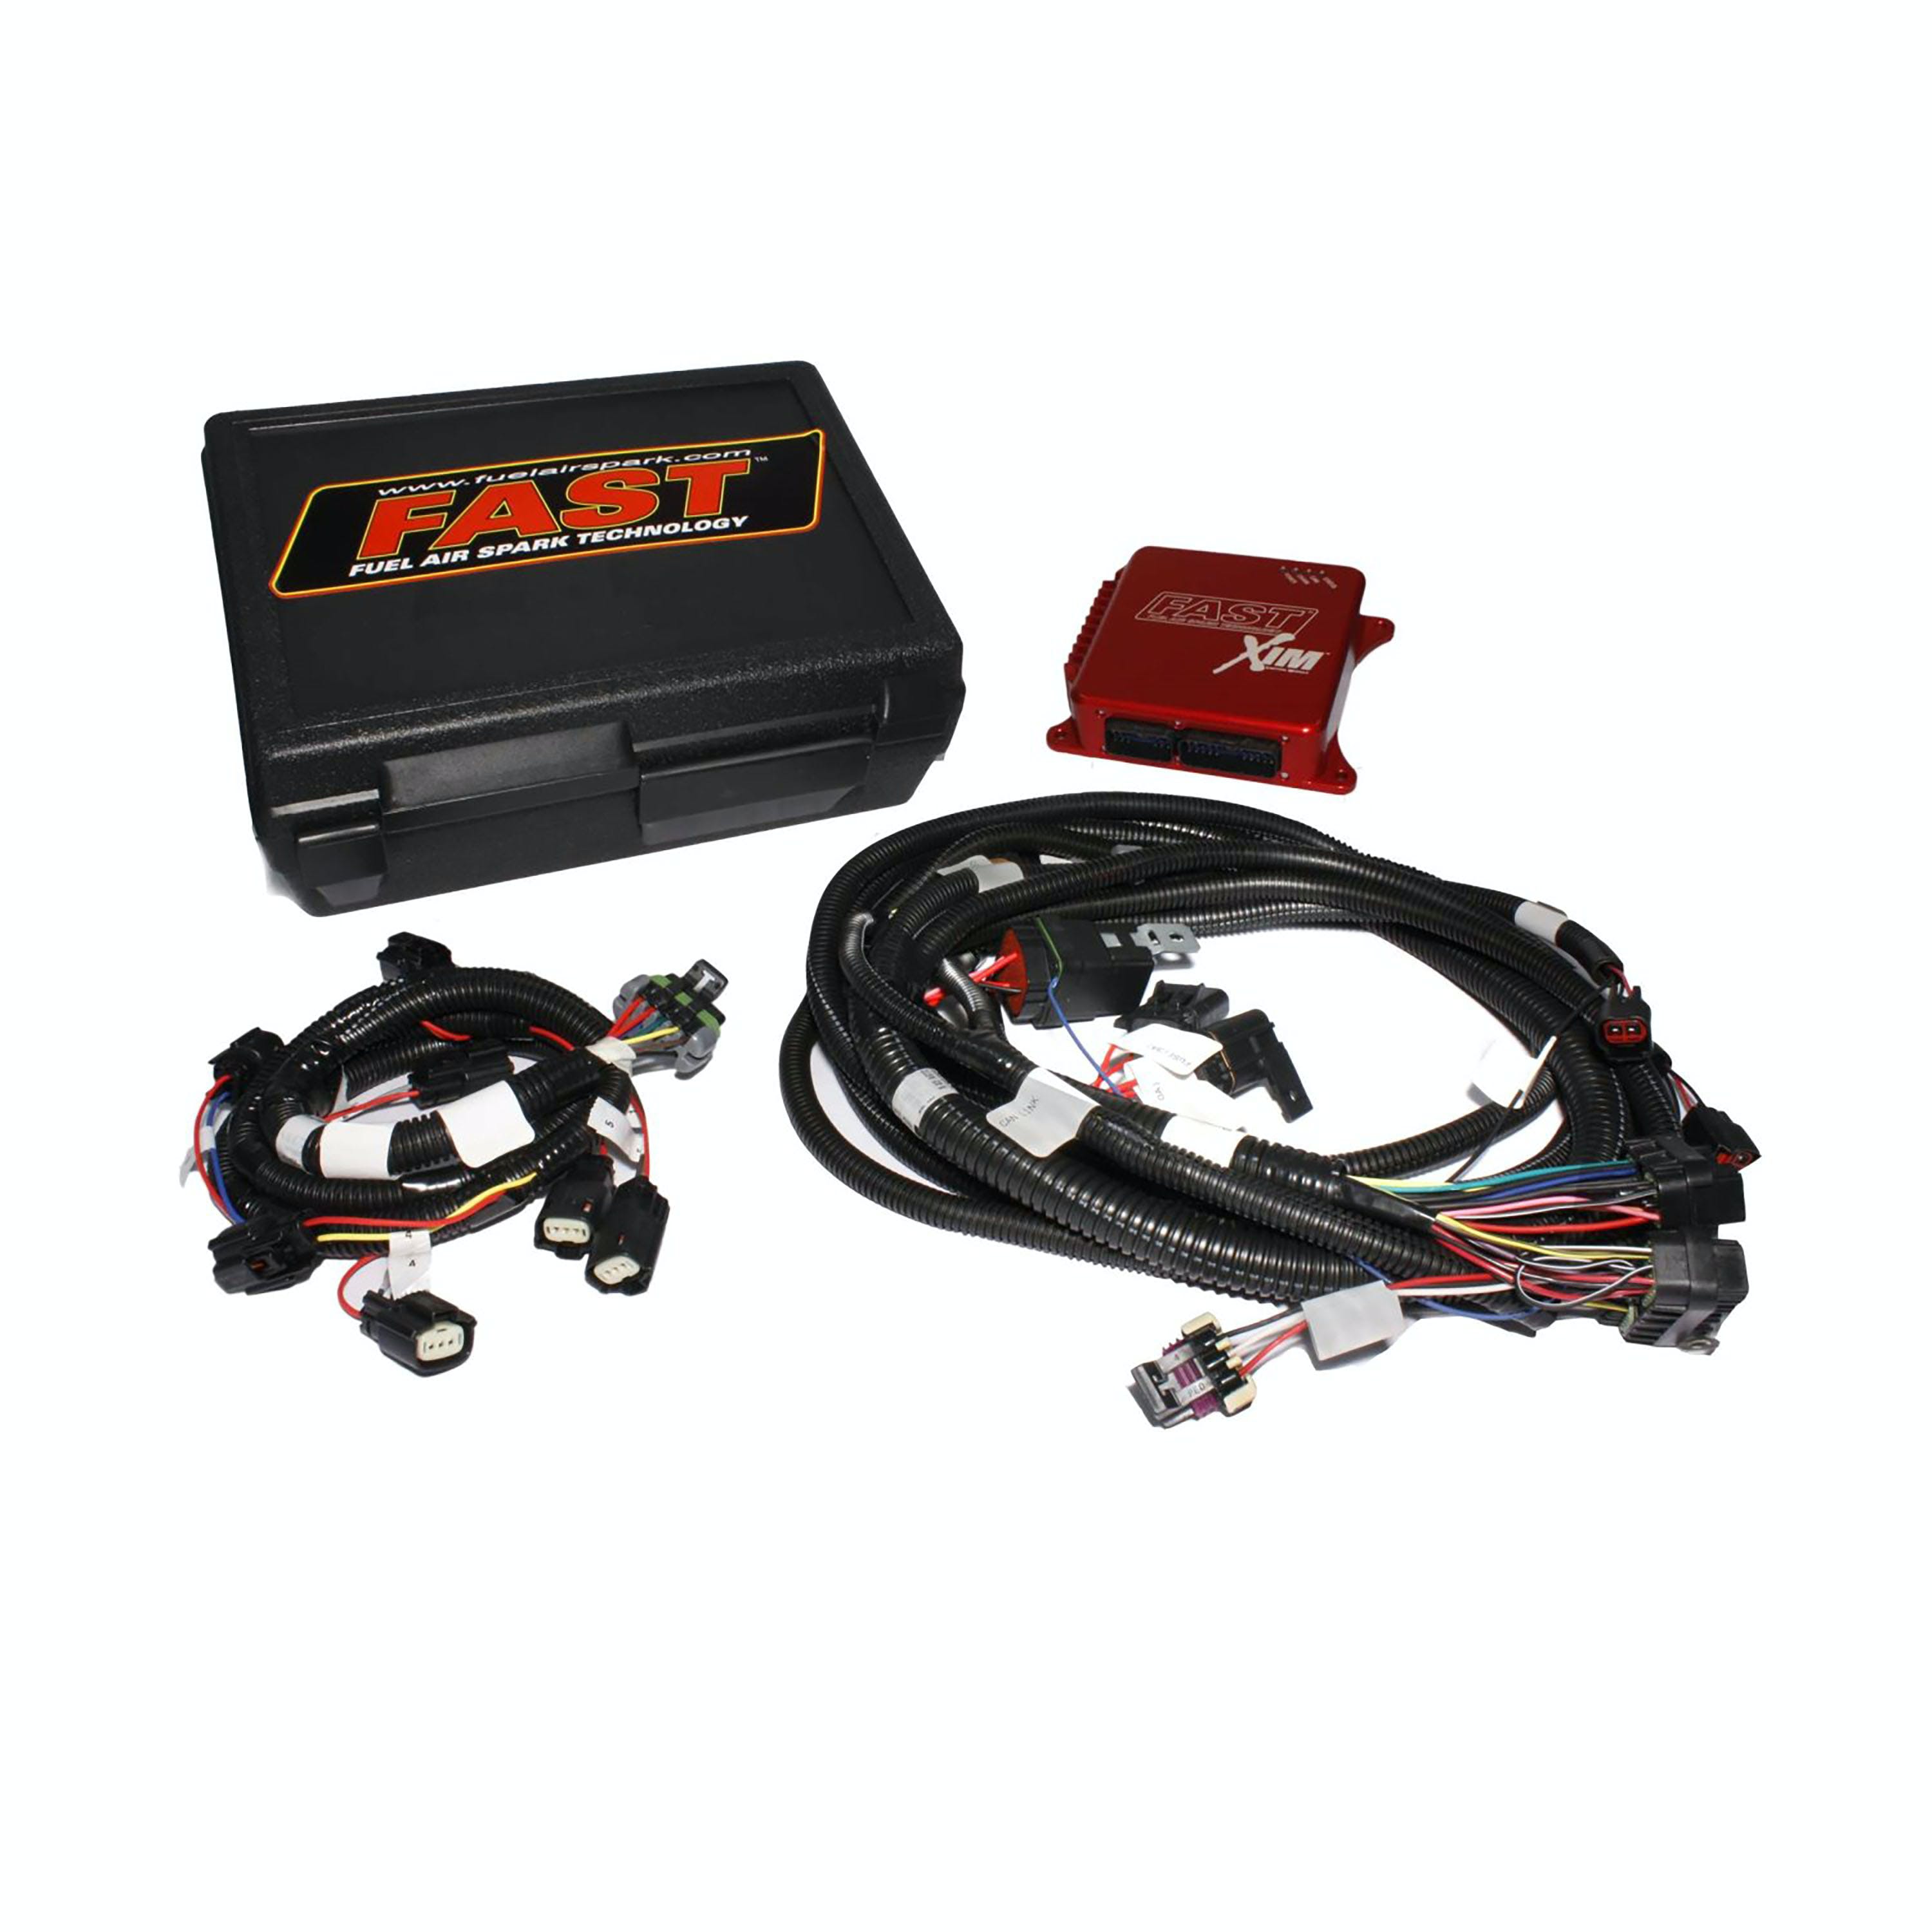 FAST - Fuel Air Spark Technology 301317 XIM Ford Coyote Kit